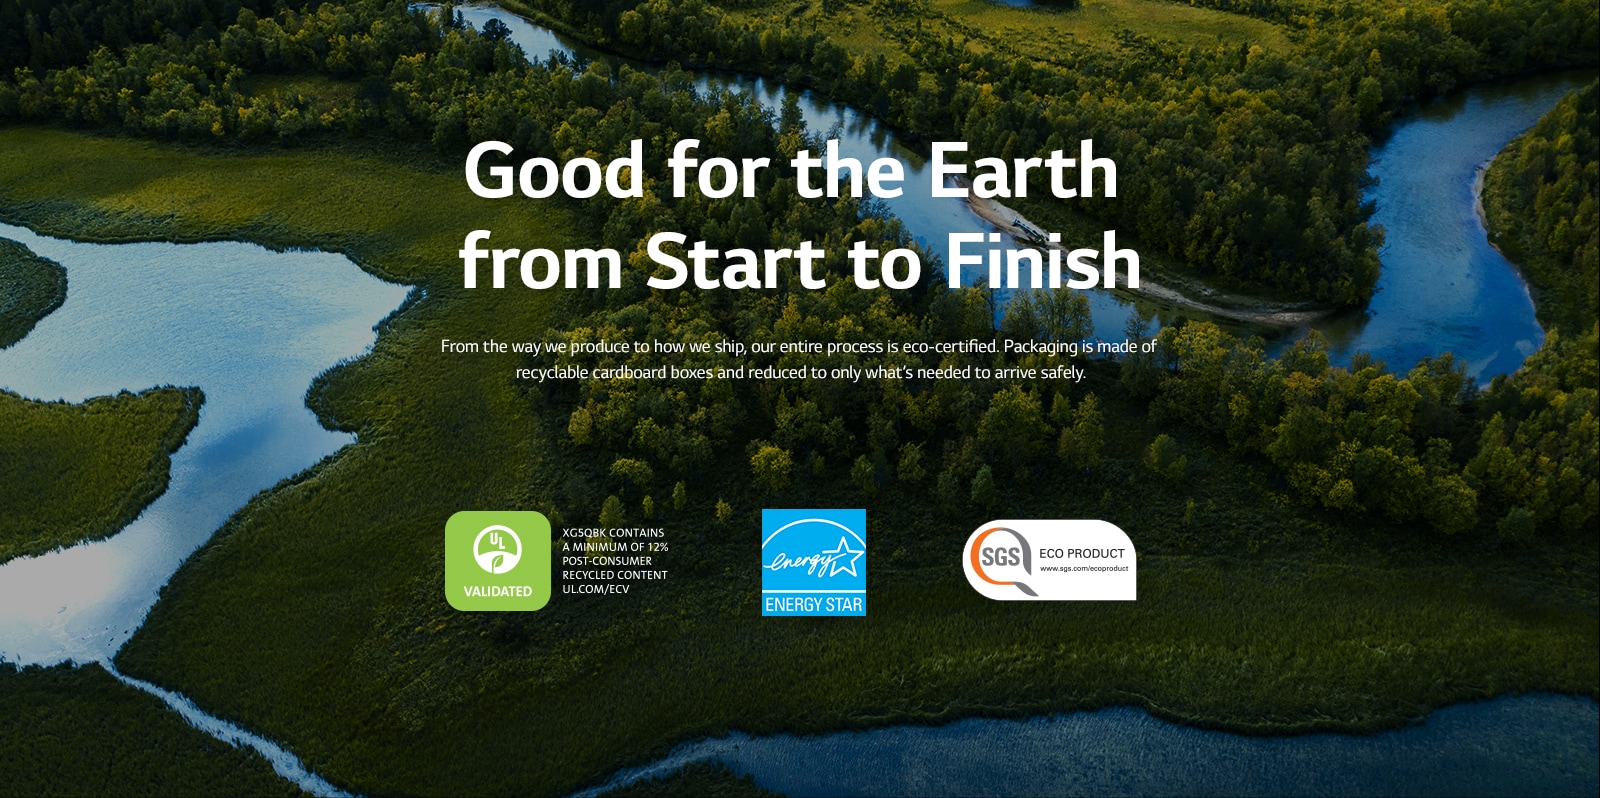 There's a forest and a river in the image. On the bottom of the image it shows UL, energy star and SGS logos.